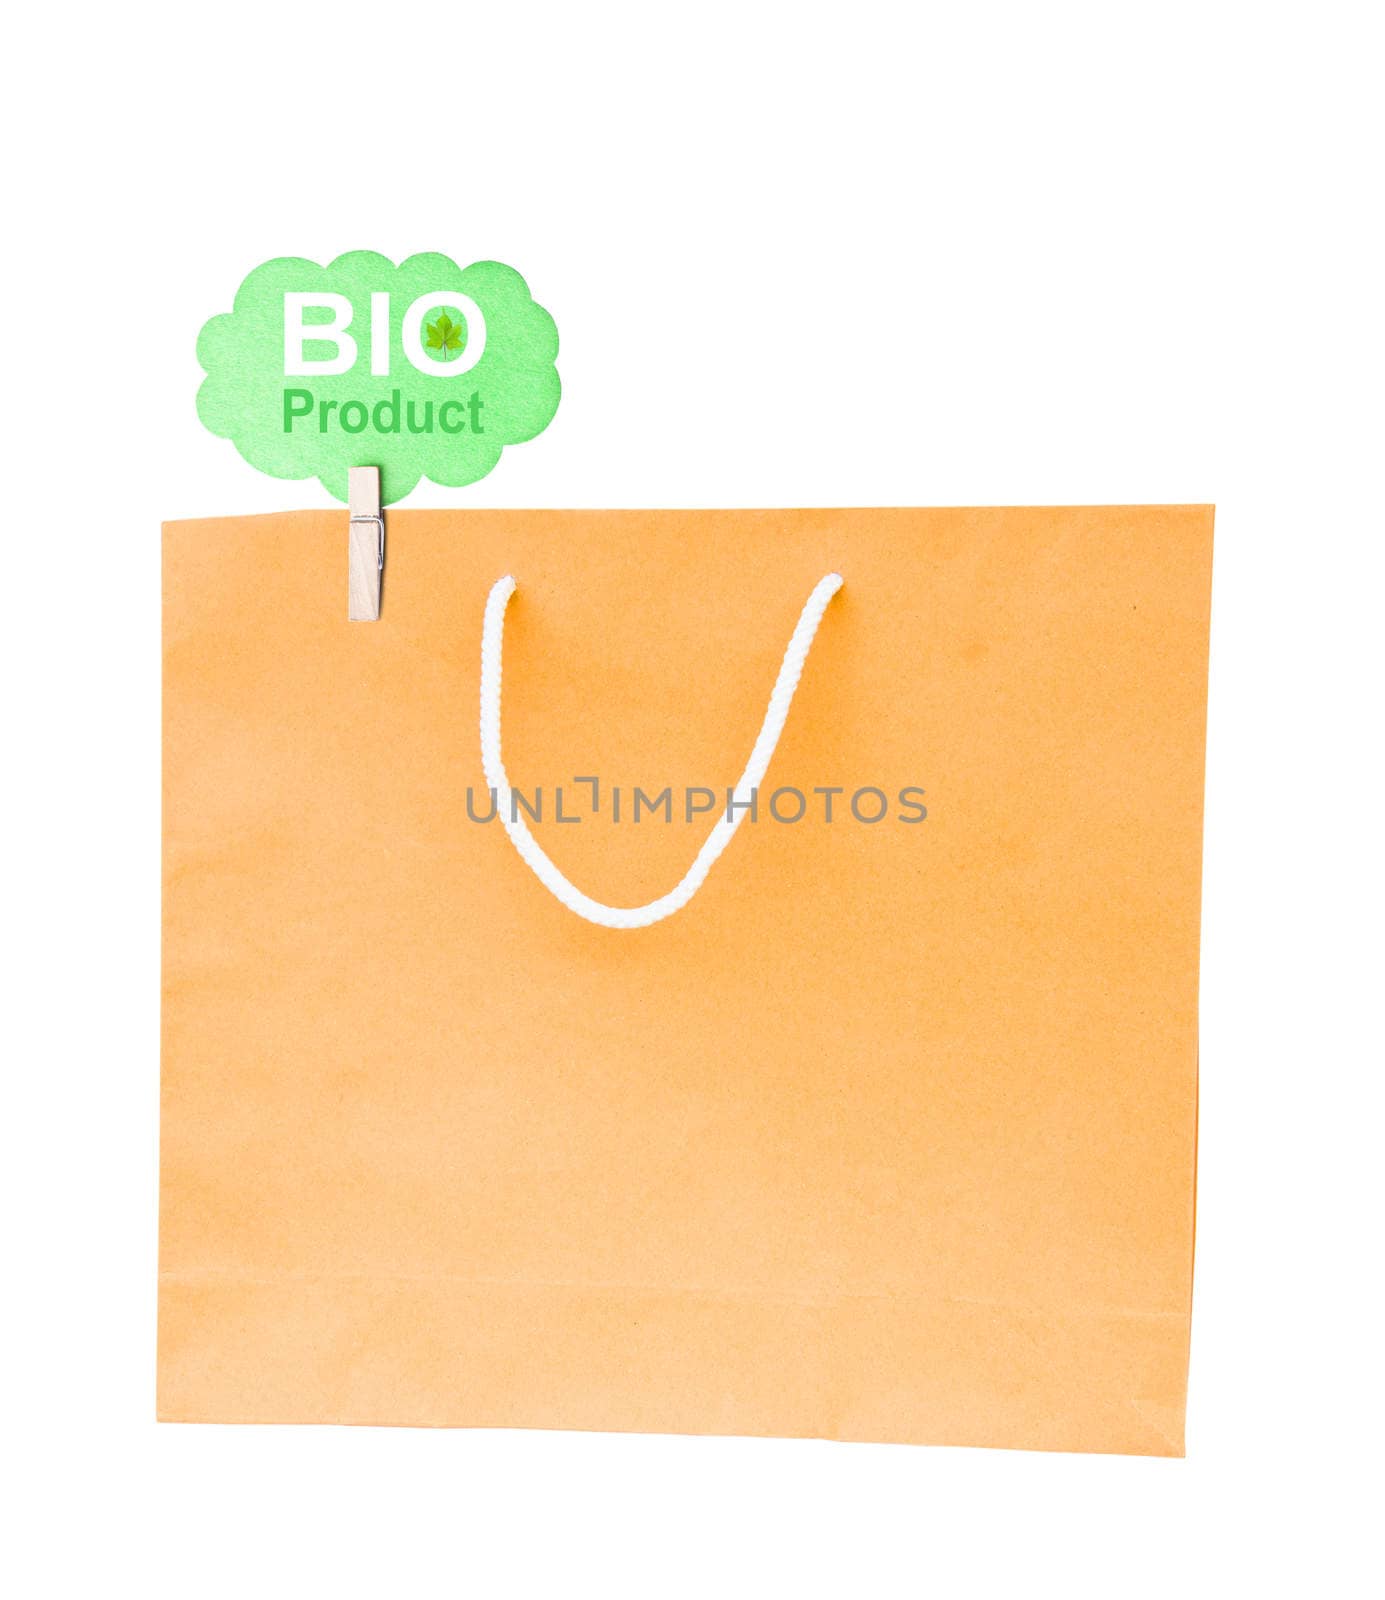 Blank brown paper bag isolated on white background. BIO Product